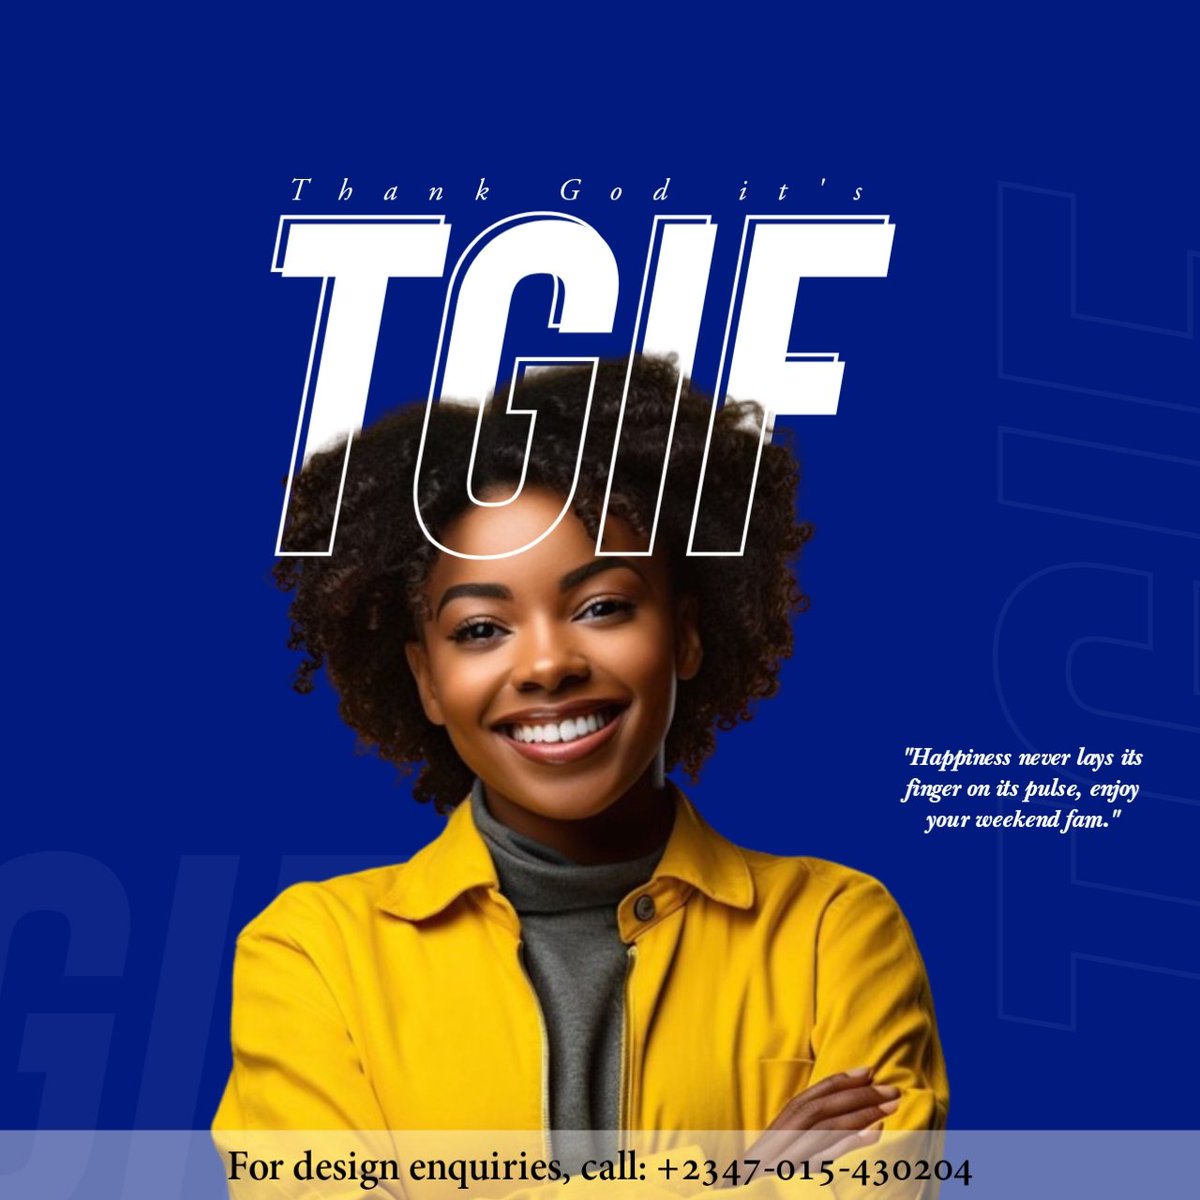 Most workers and students always enjoy the weekend Breeze, certainly! And yeah, it's a TGIF design for y'all 😌 Have a Blissful weekend, GM 🪄 #Designchallenge #Day 2